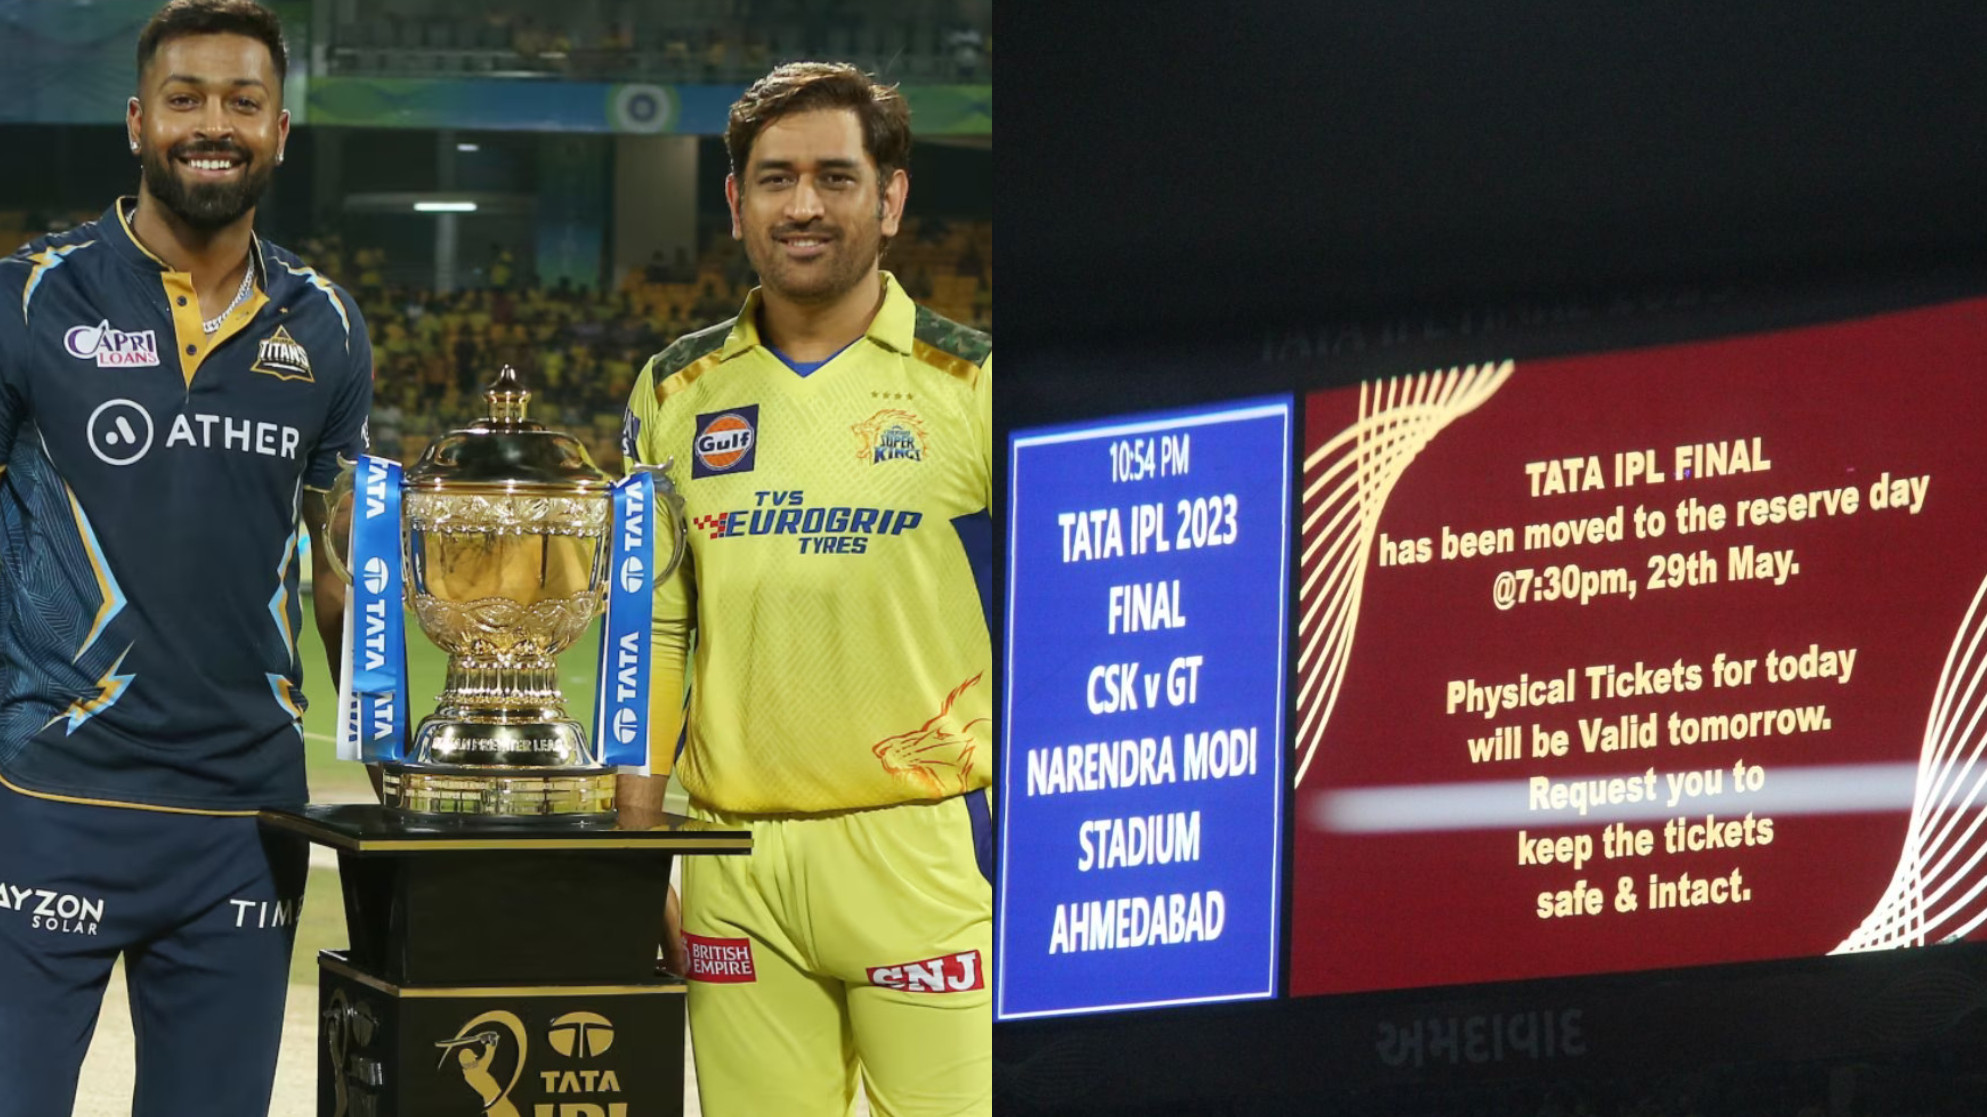 IPL 2023 final to be played on reserve day, May 29, after torrential